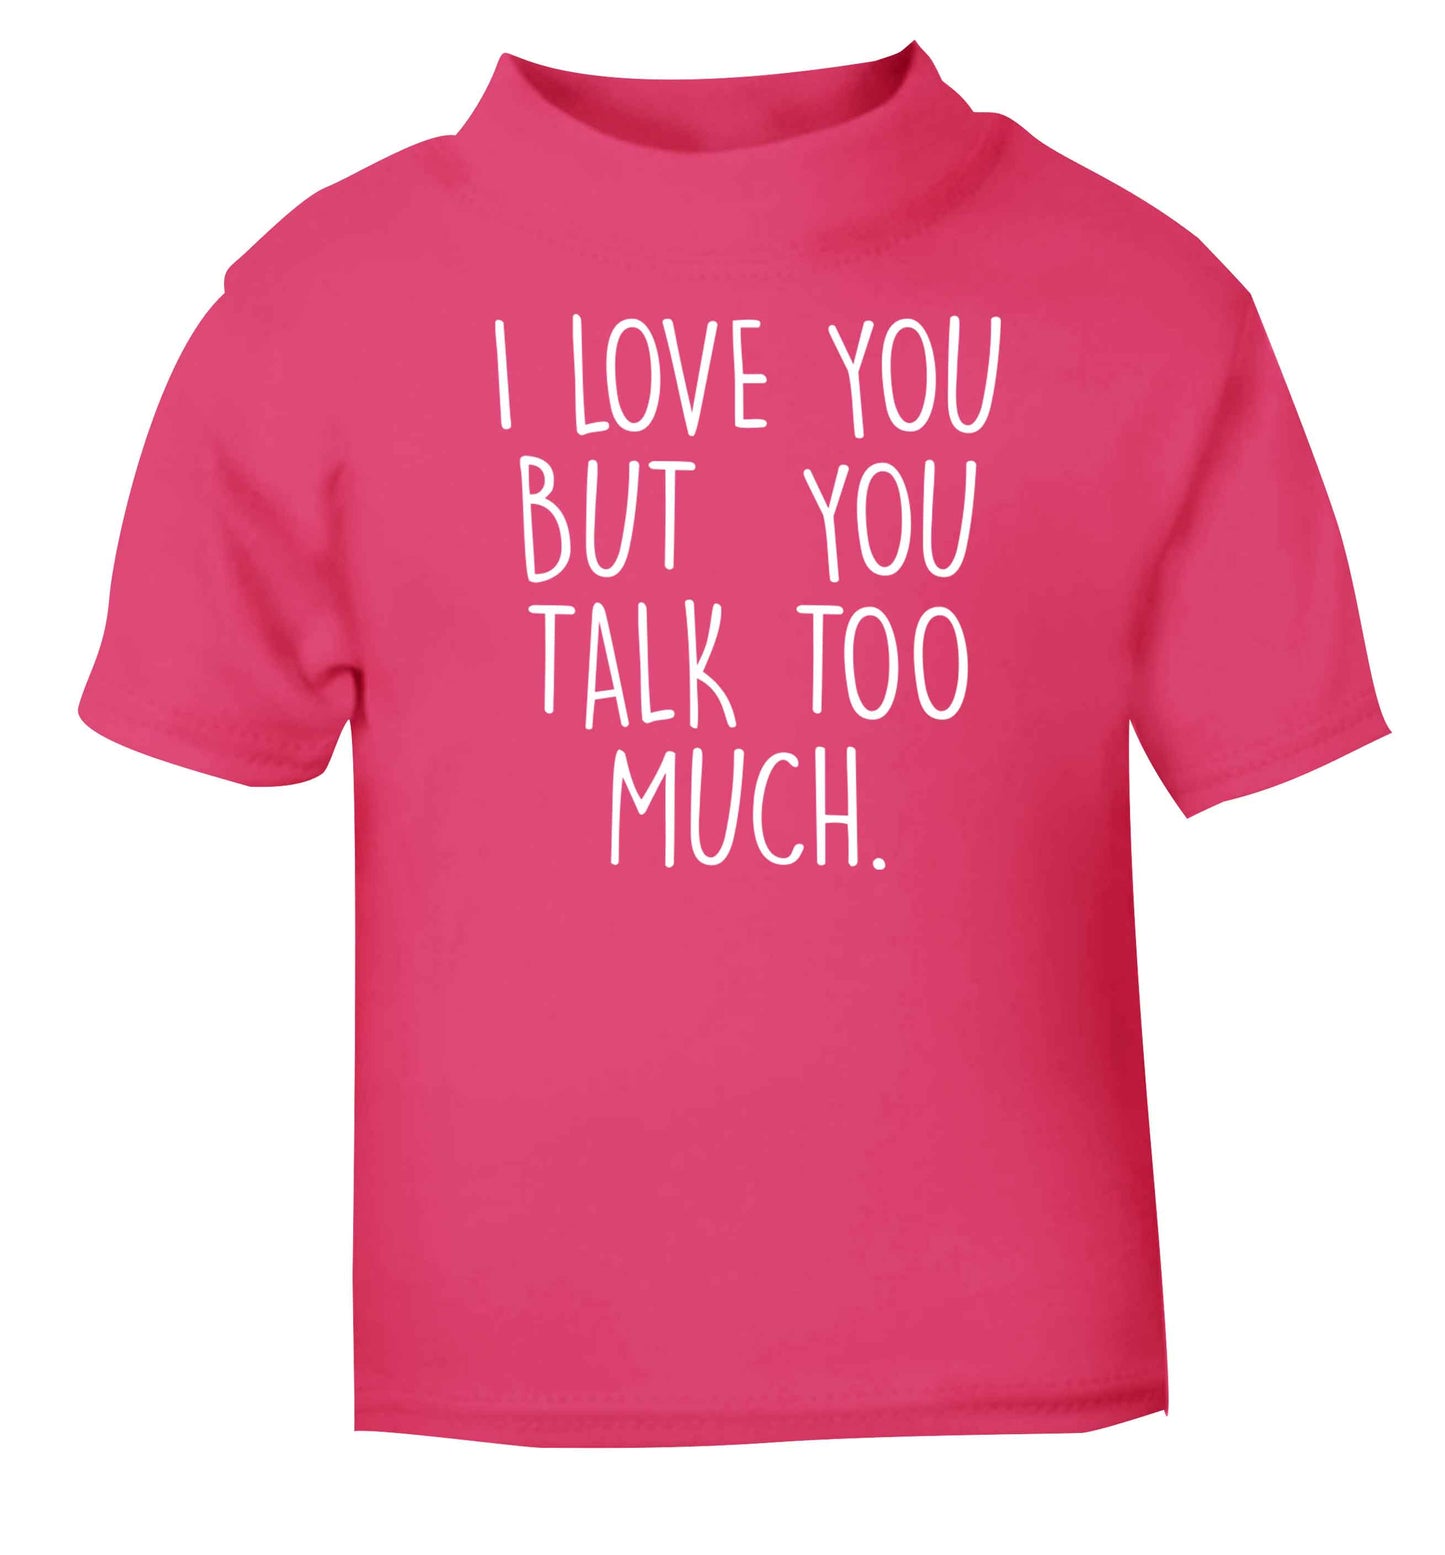 I love you but you talk too much pink baby toddler Tshirt 2 Years